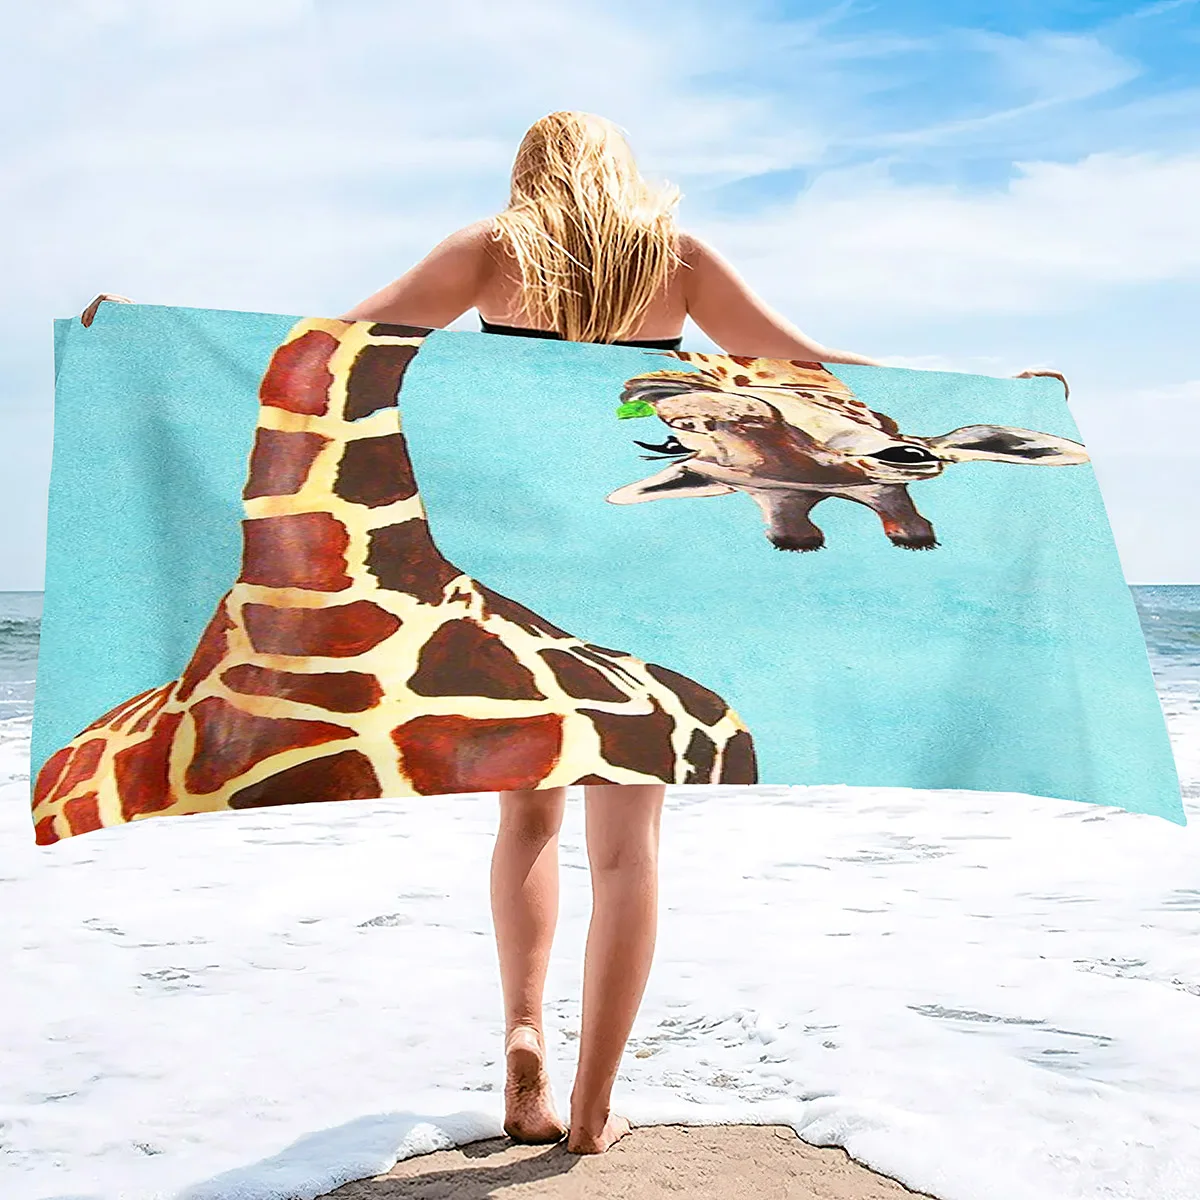 

Cute Funny Giraffe Microfiber Bath Towel Gifts for Kids Women,Sand Free Quick Dry Travel Towels,Extra Large Absorbent Pool Towel